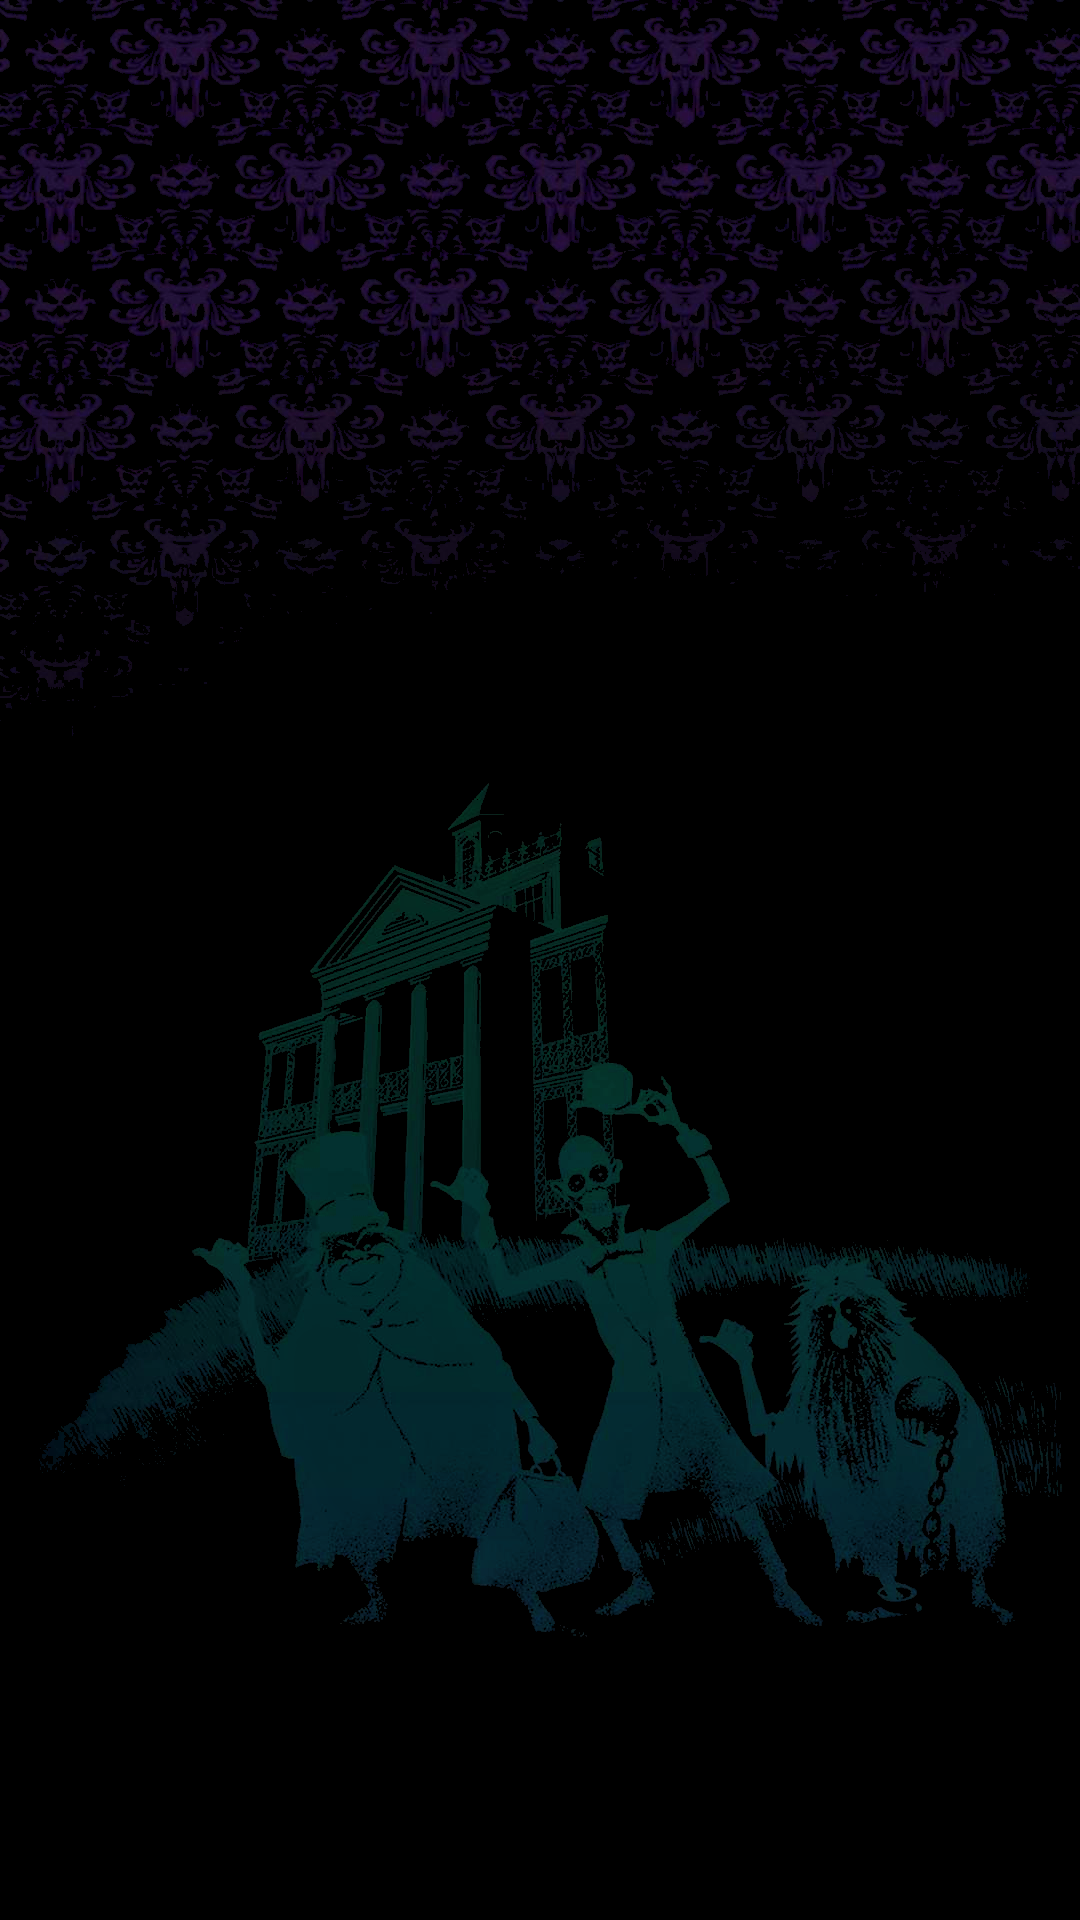 A mobile wallpaper with some subtle spookiness Halloween!